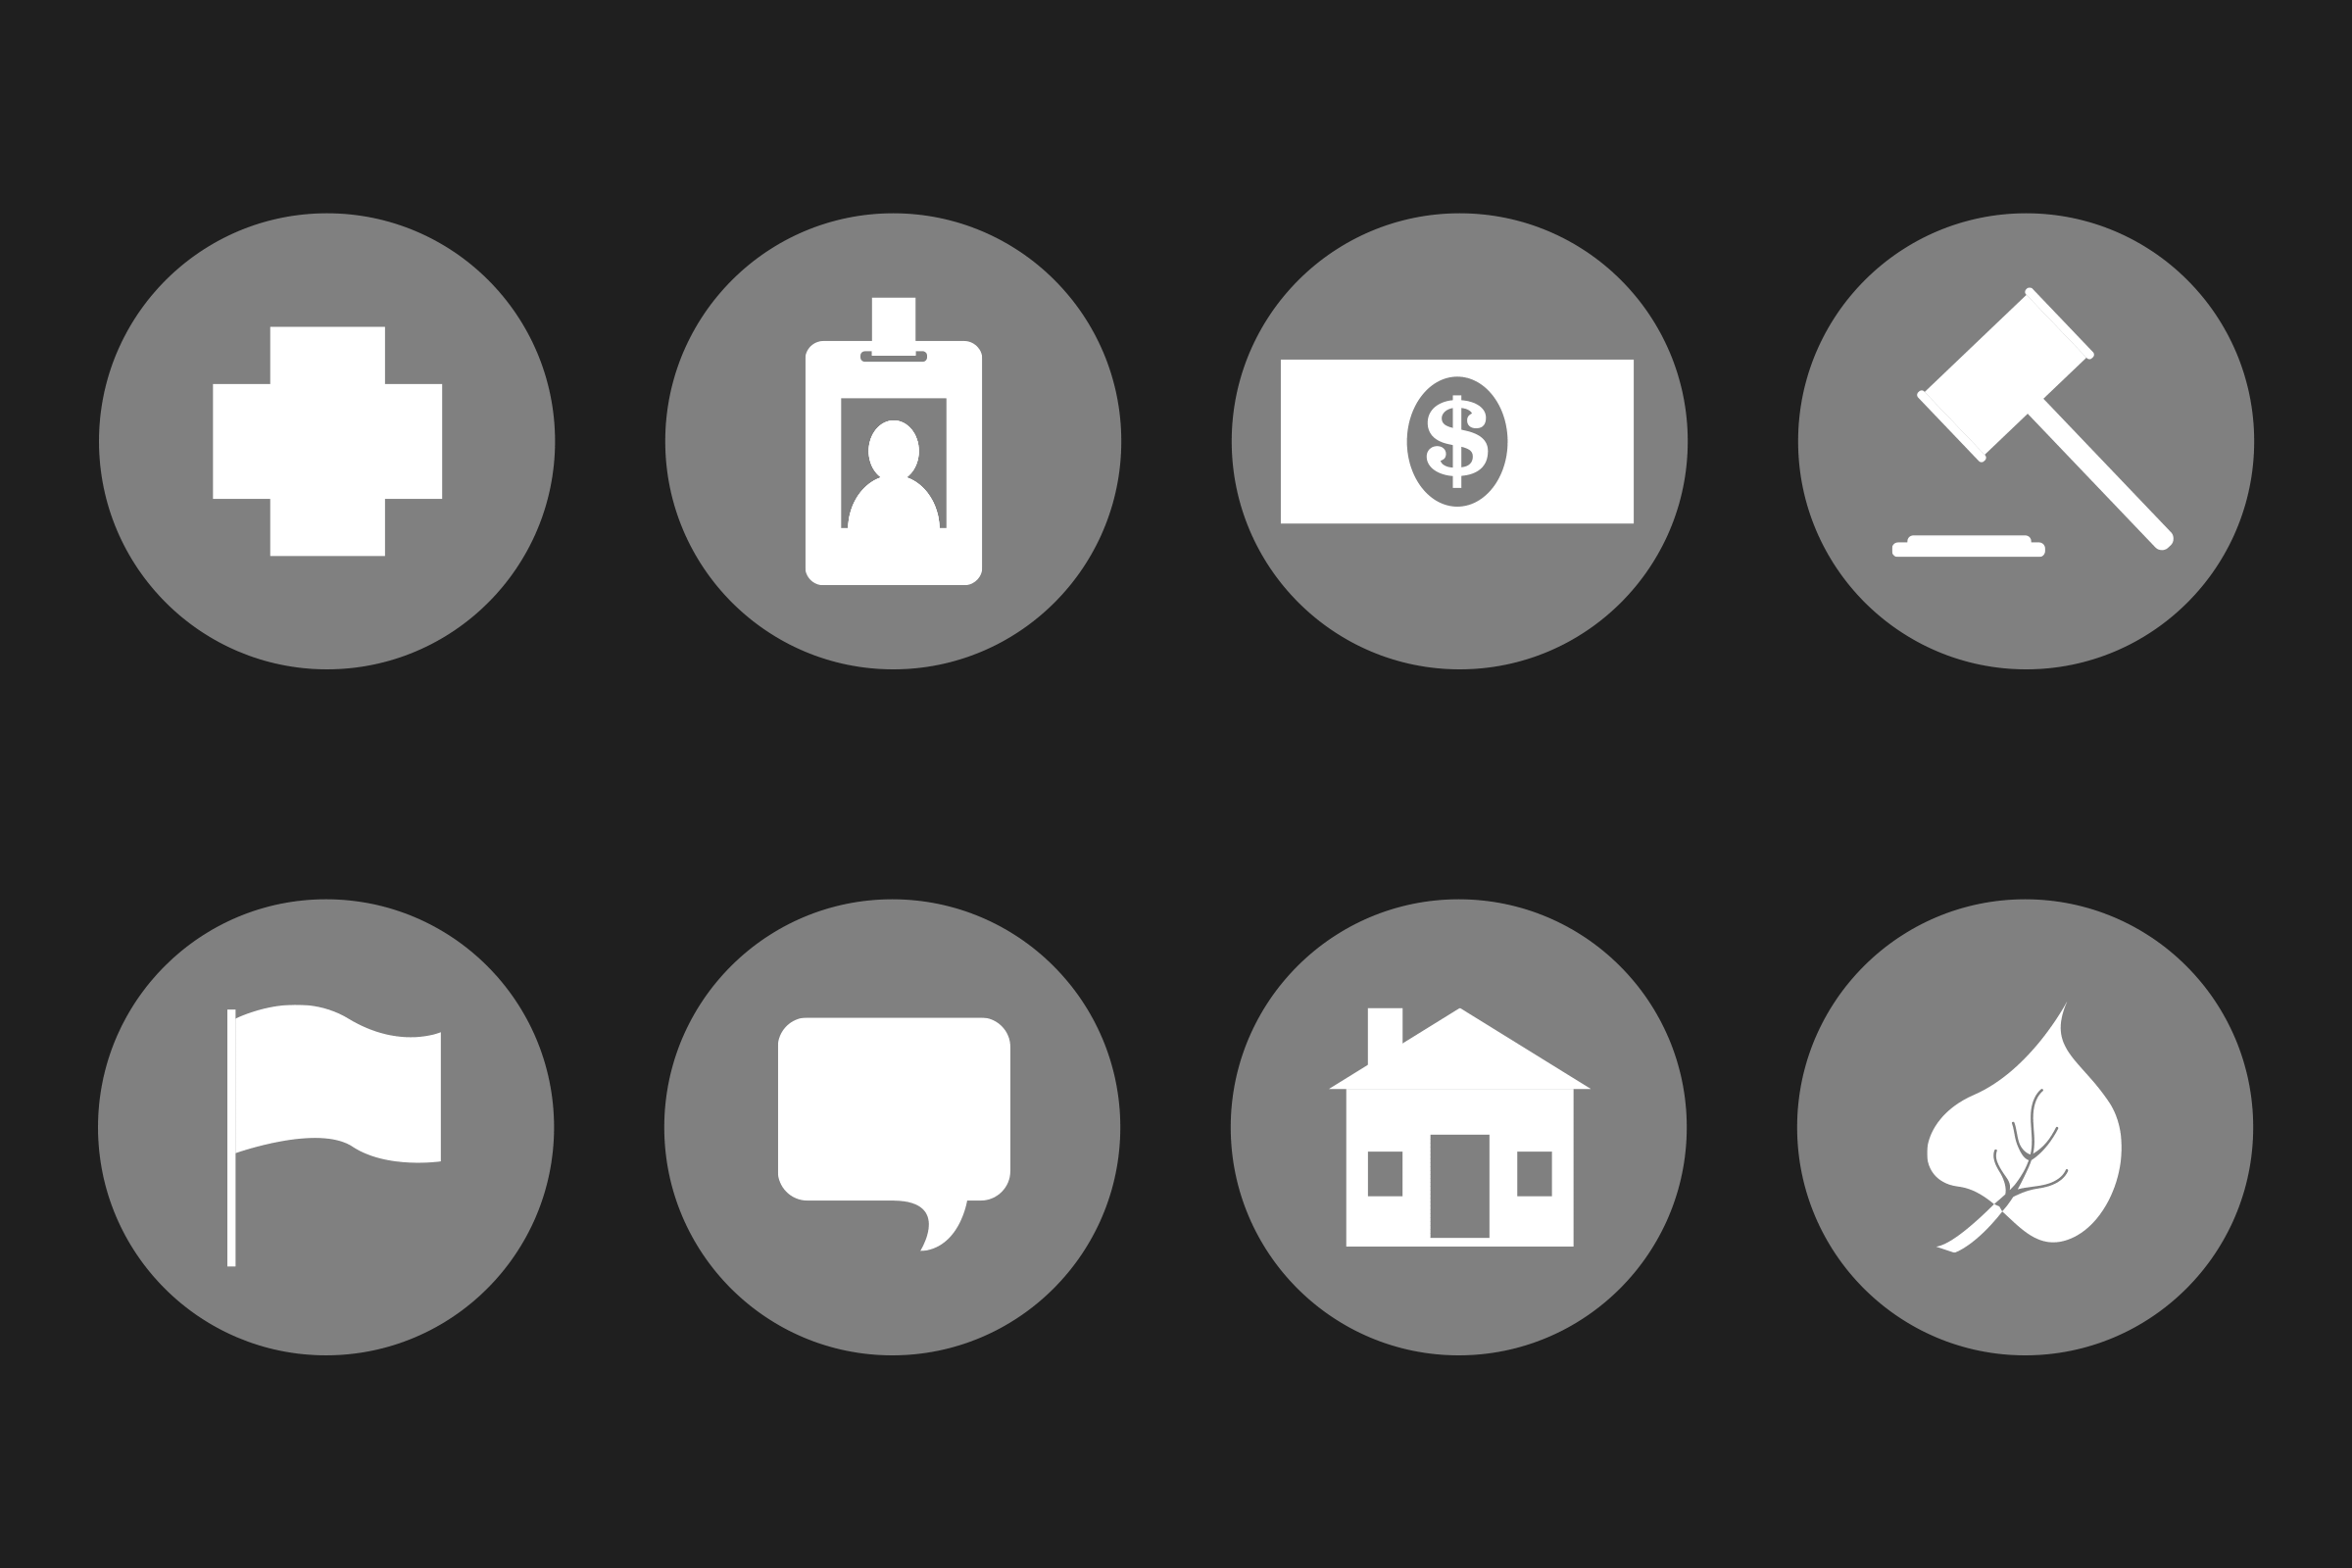 Animated icons of a medical cross, an ID badge, cash, a gavel, a flag, a chat bubble, a house and a leaf